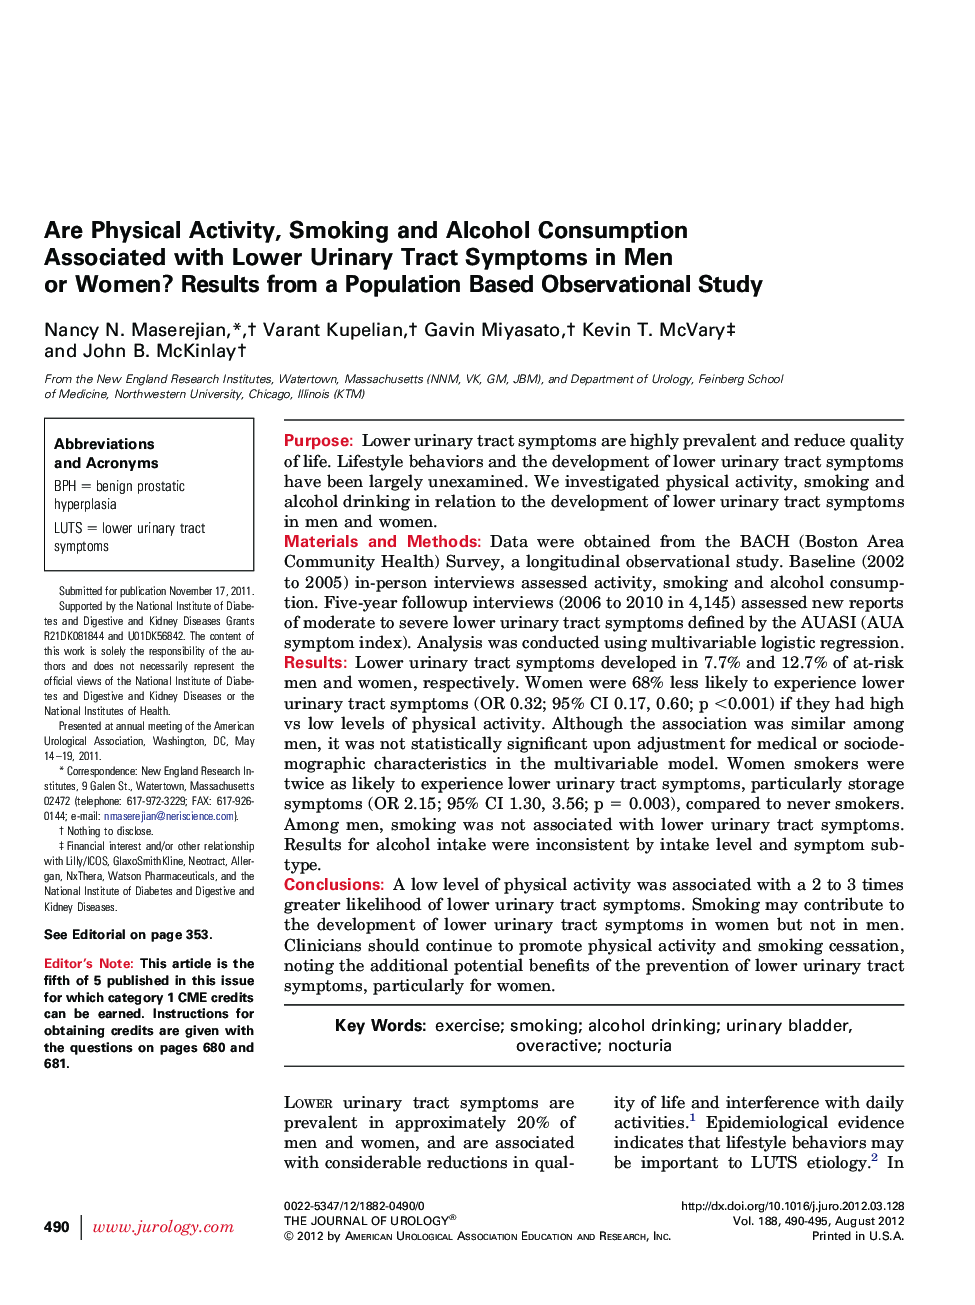 Are Physical Activity, Smoking and Alcohol Consumption Associated with Lower Urinary Tract Symptoms in Men or Women? Results from a Population Based Observational Study 